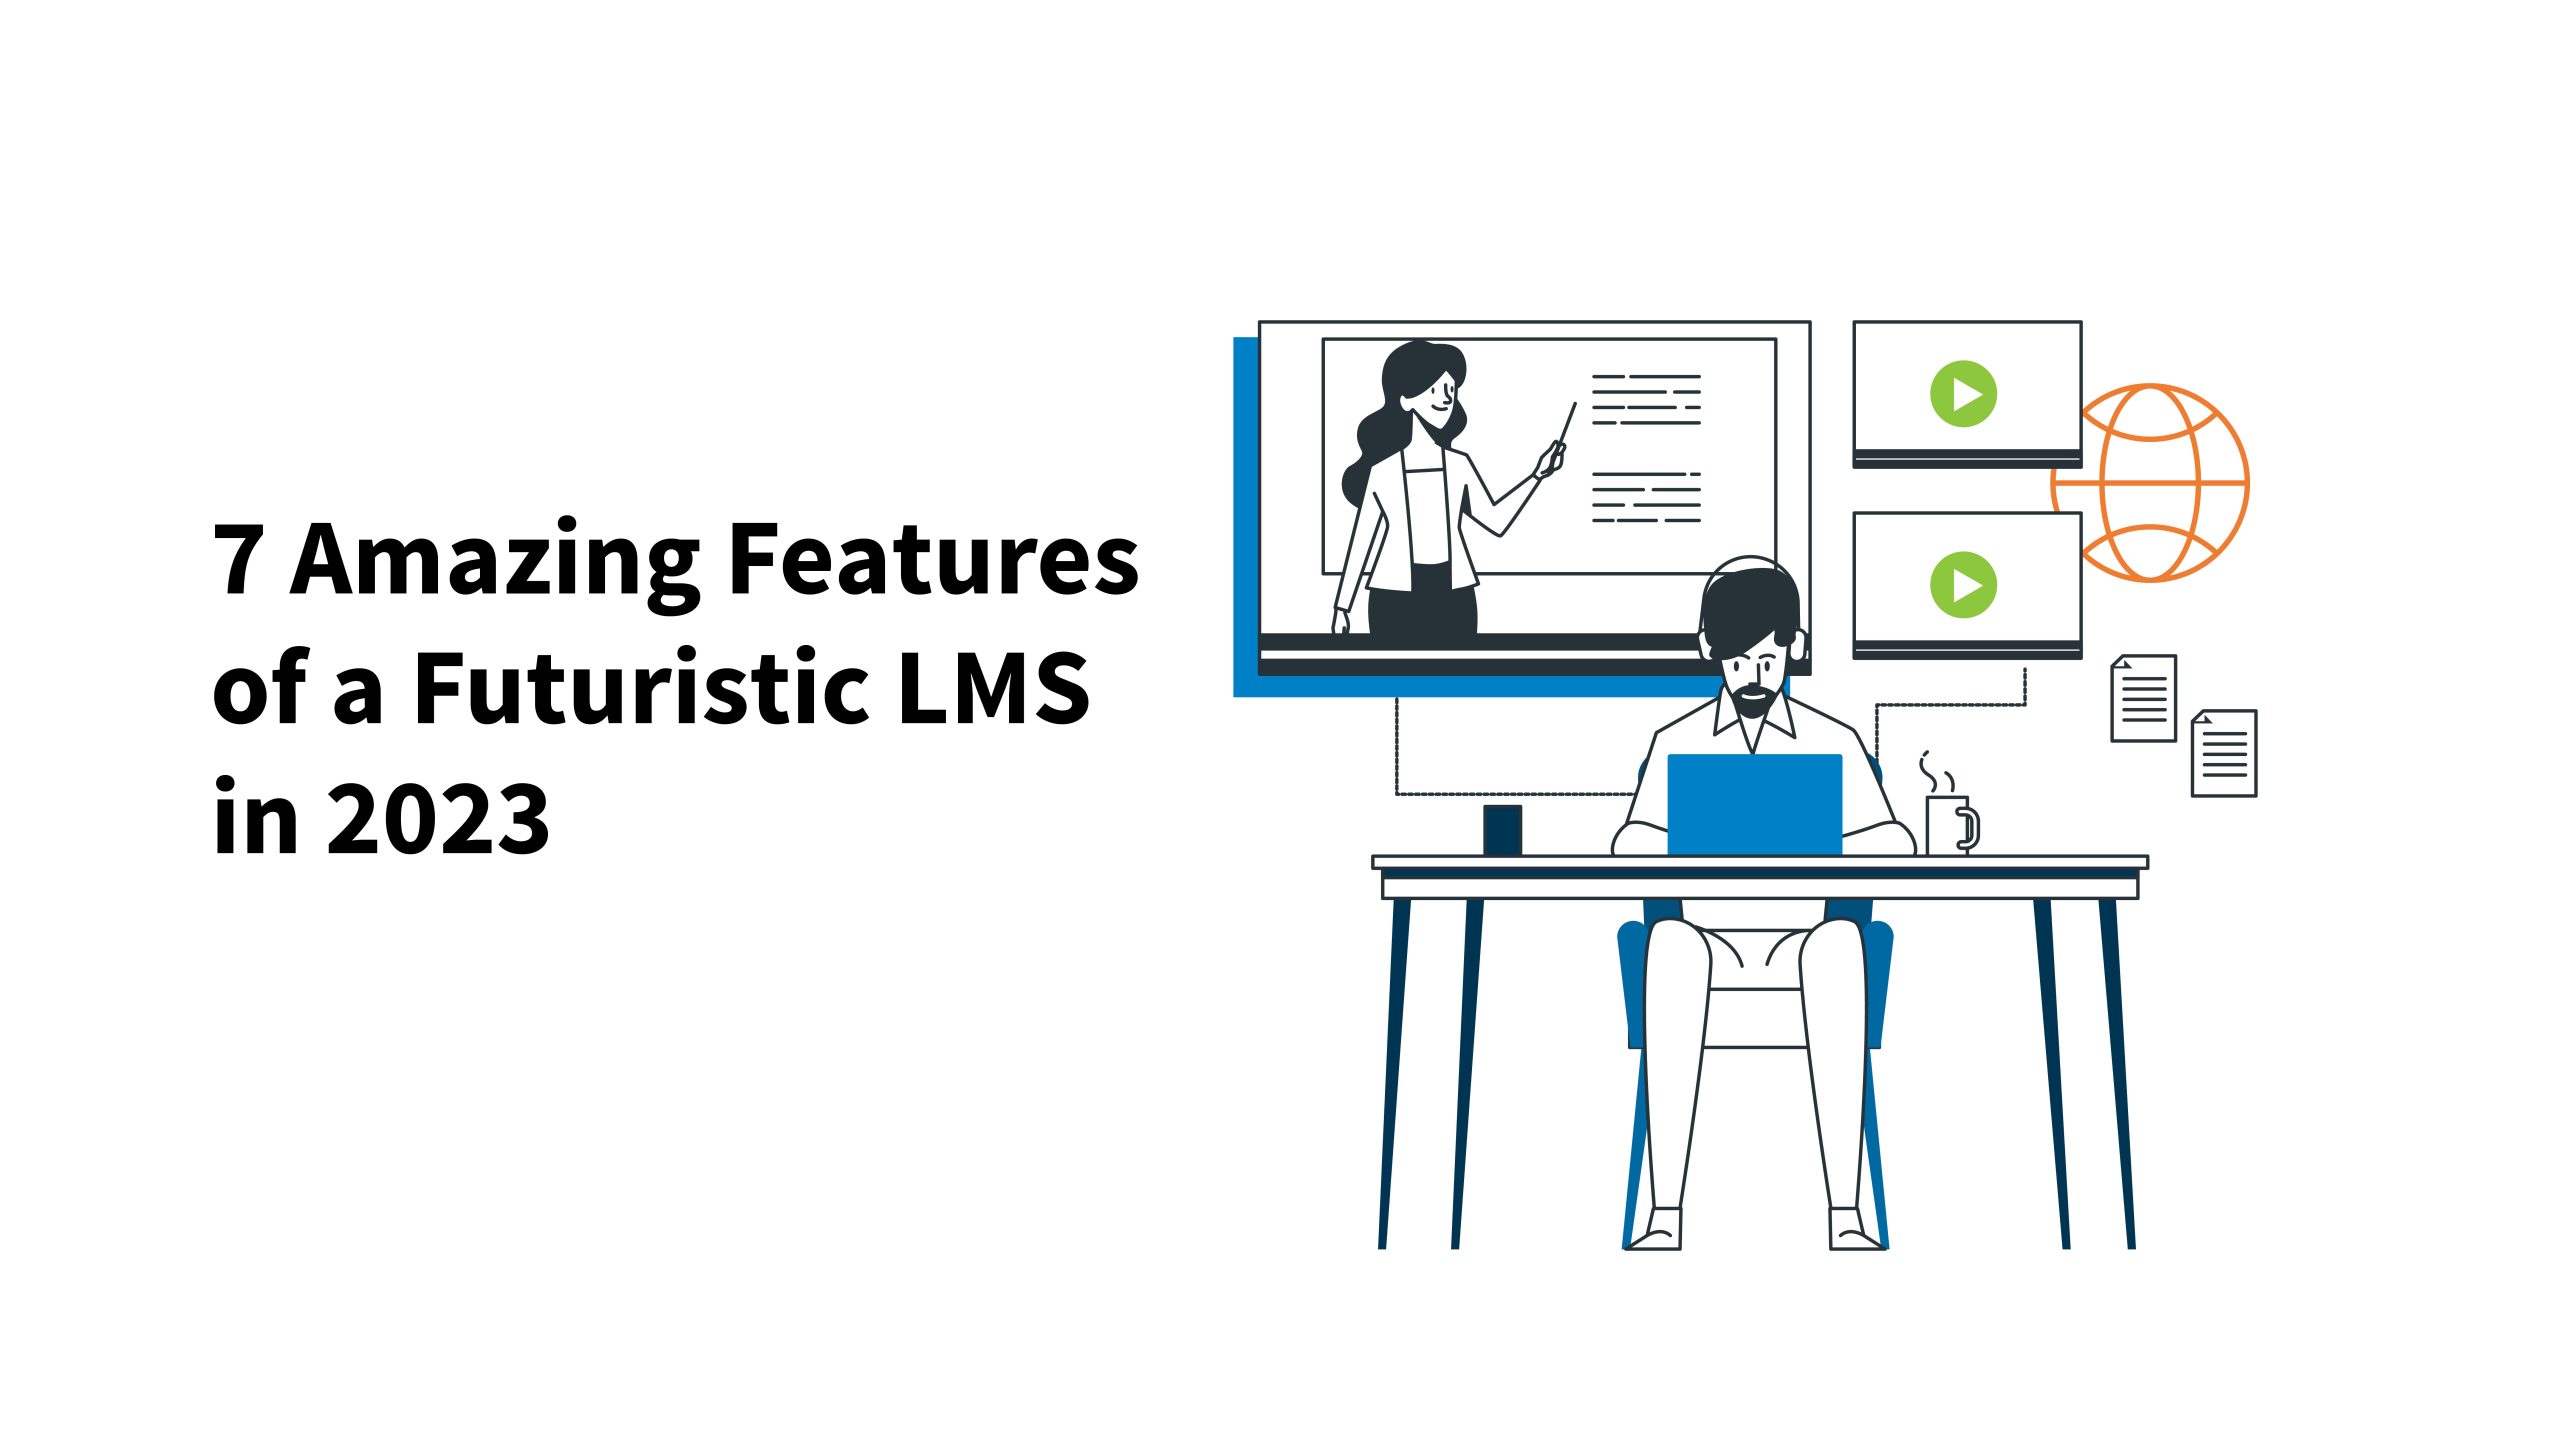 7 Amazing Features of a Futuristic LMS in 2023